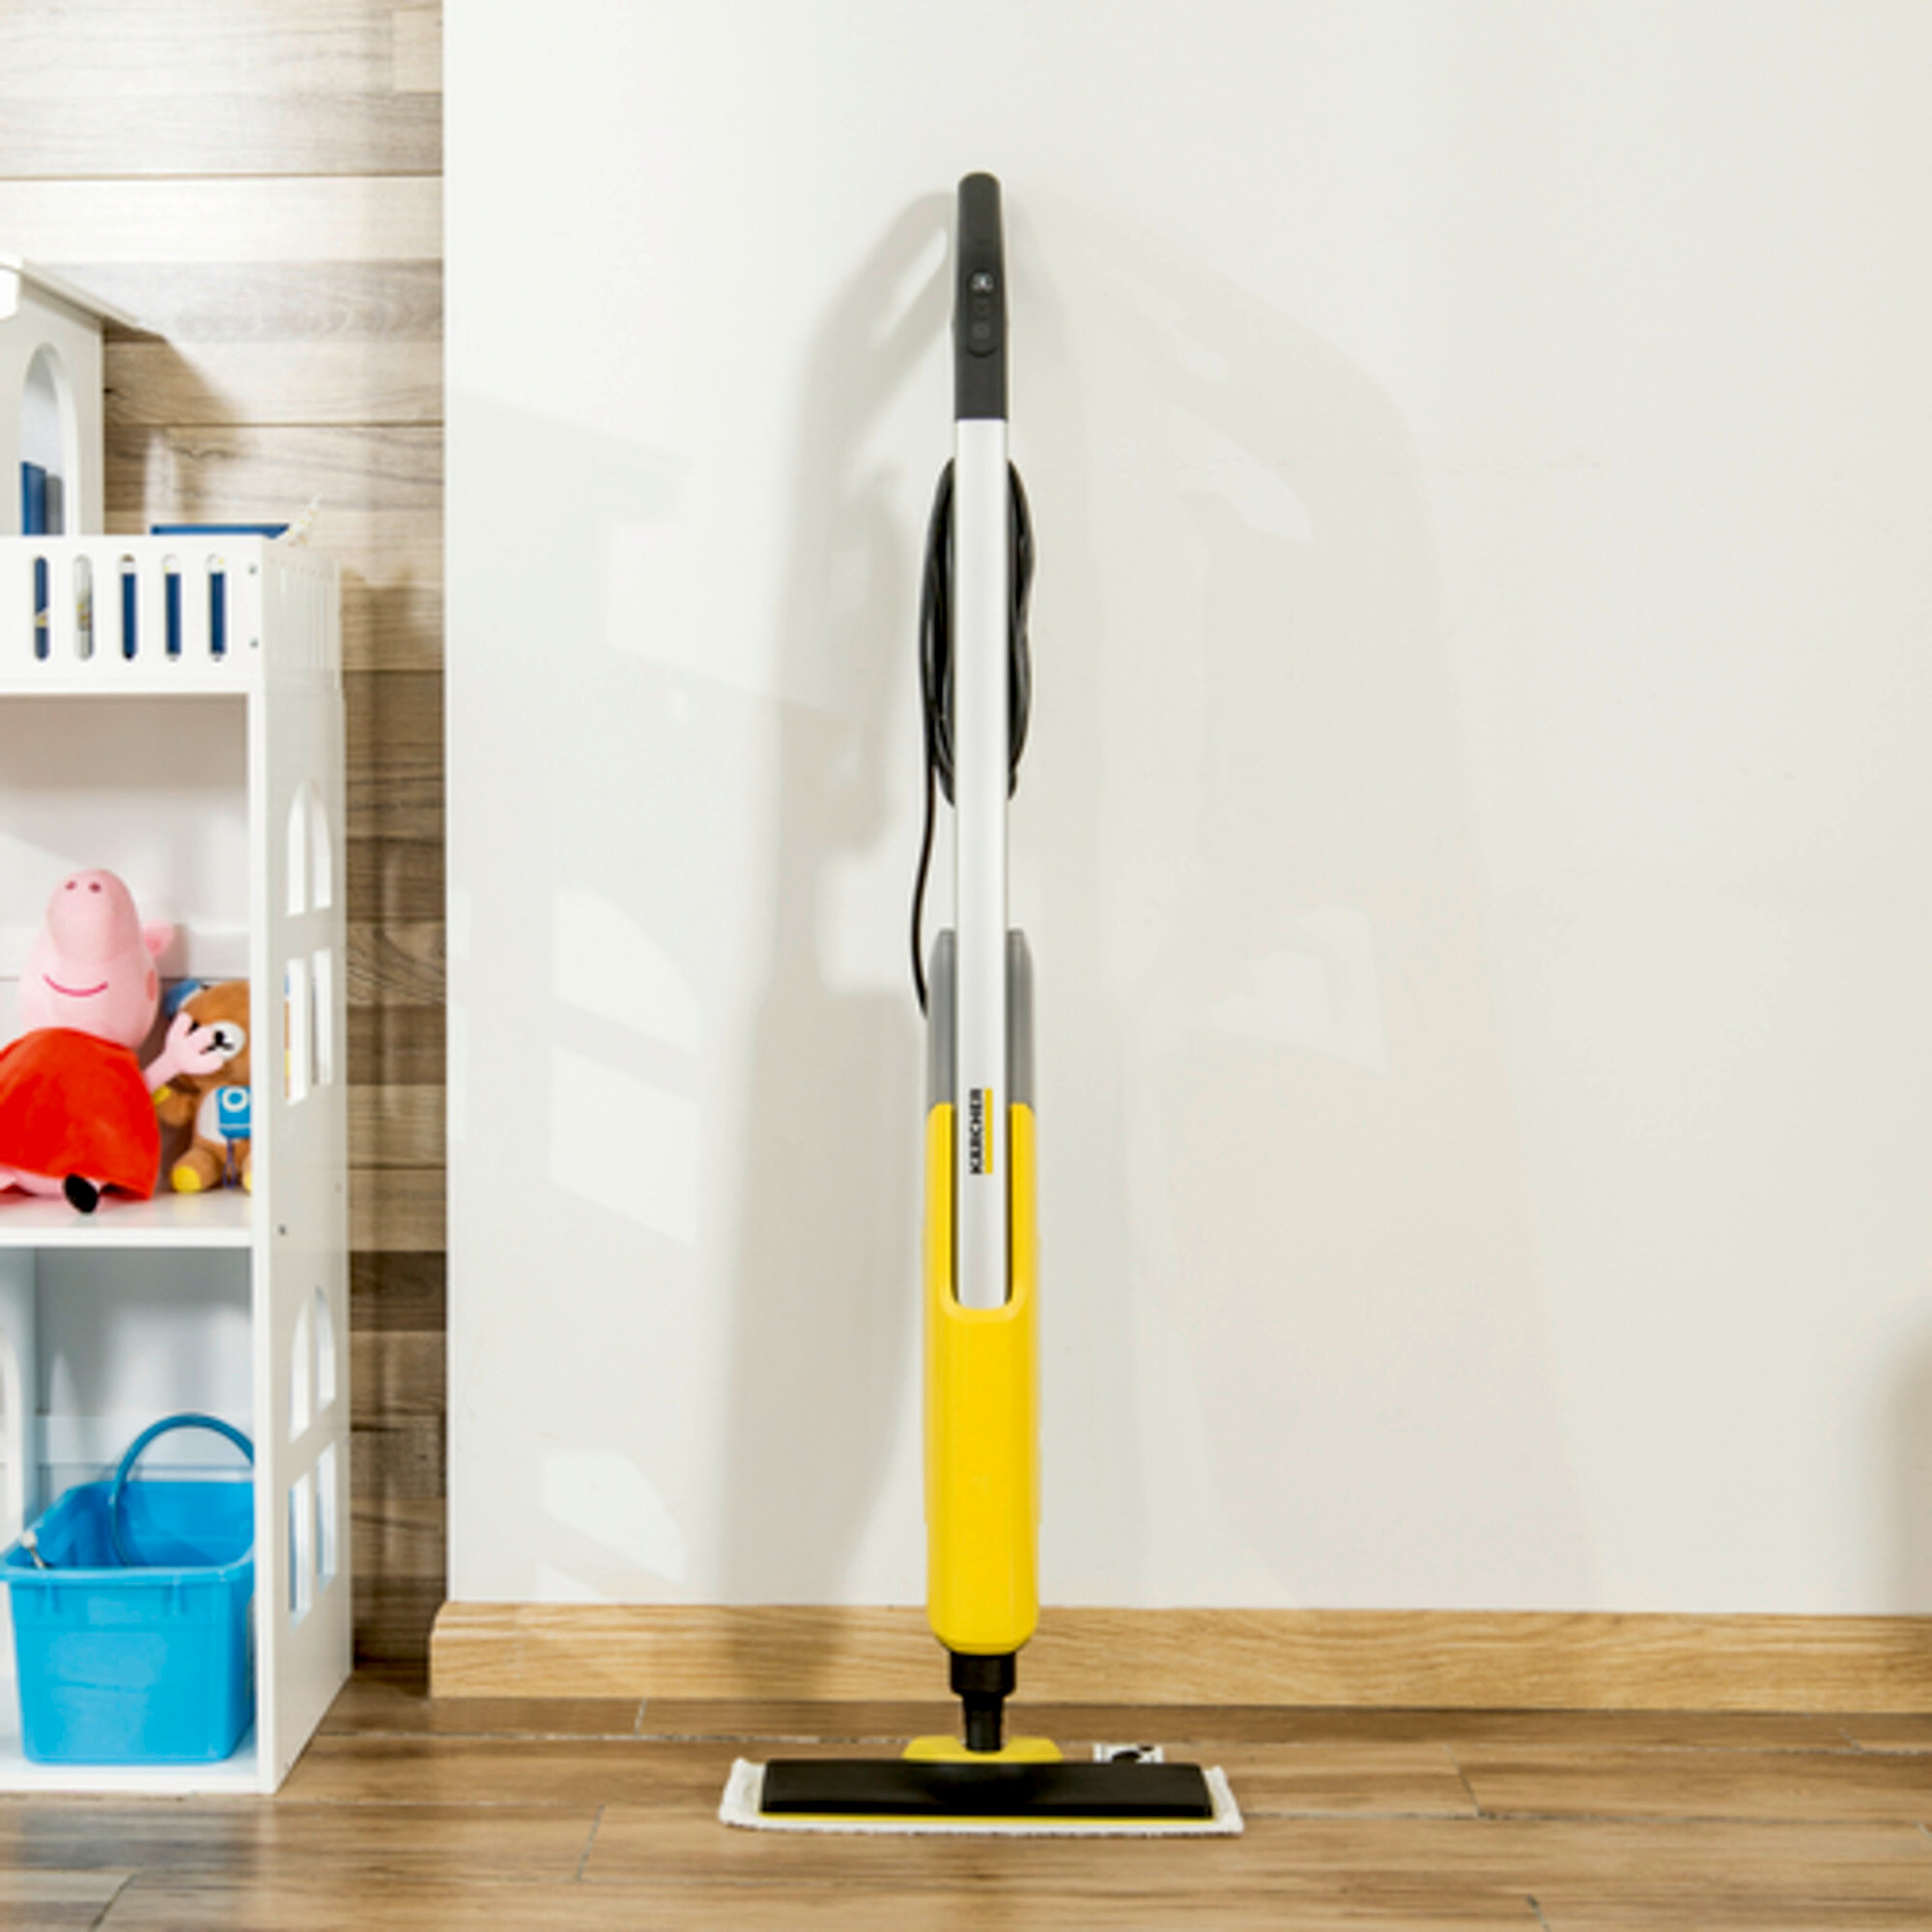 Steam mop SC 2 Upright EasyFix: Slimline product design and floor head with swivel joint